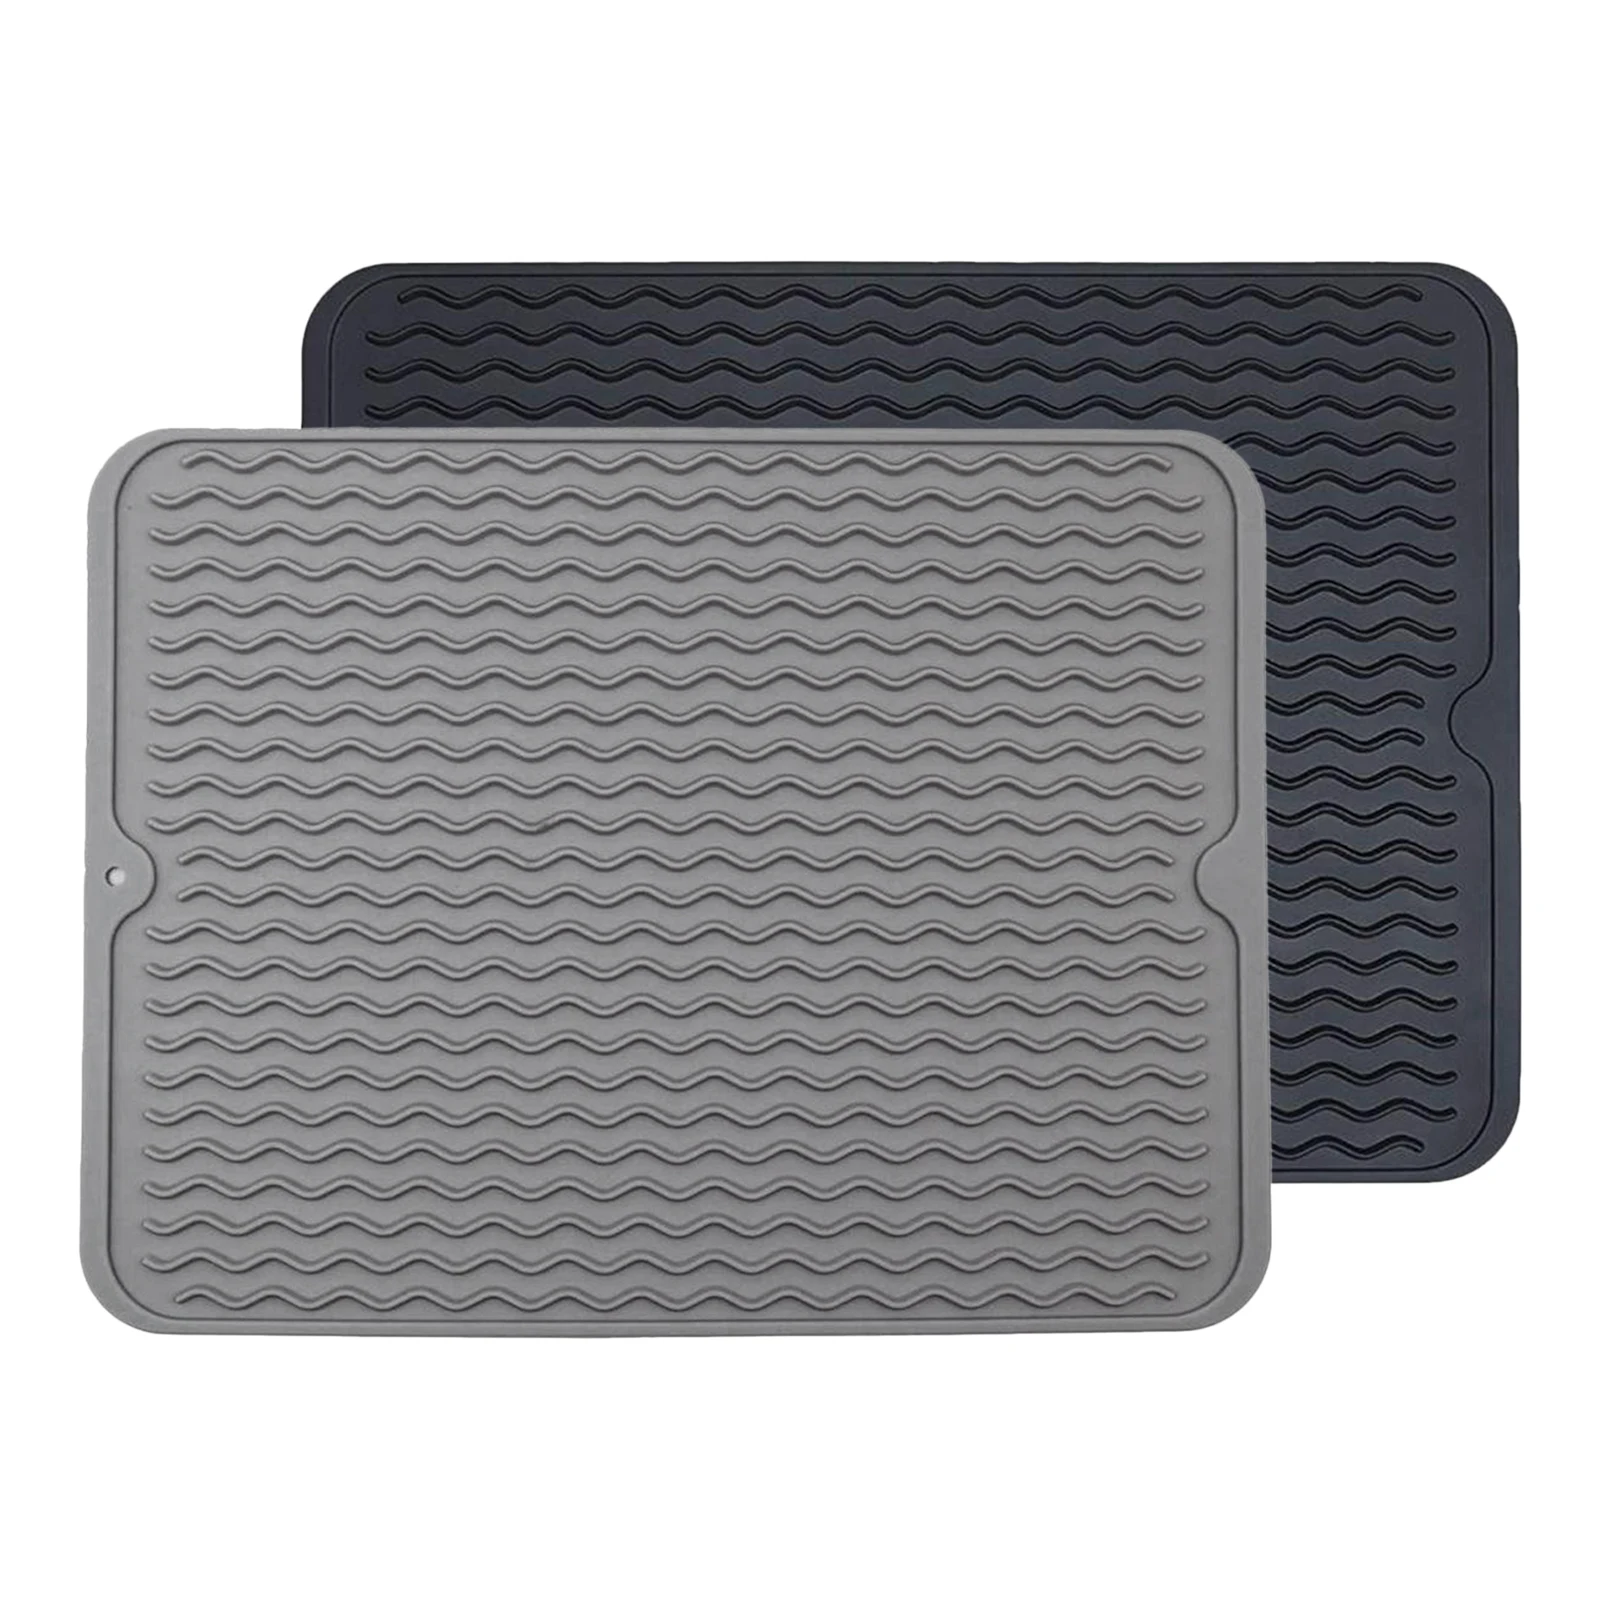  Stone Drying Mat for Kitchen Counter, 15.7x11.8 inch